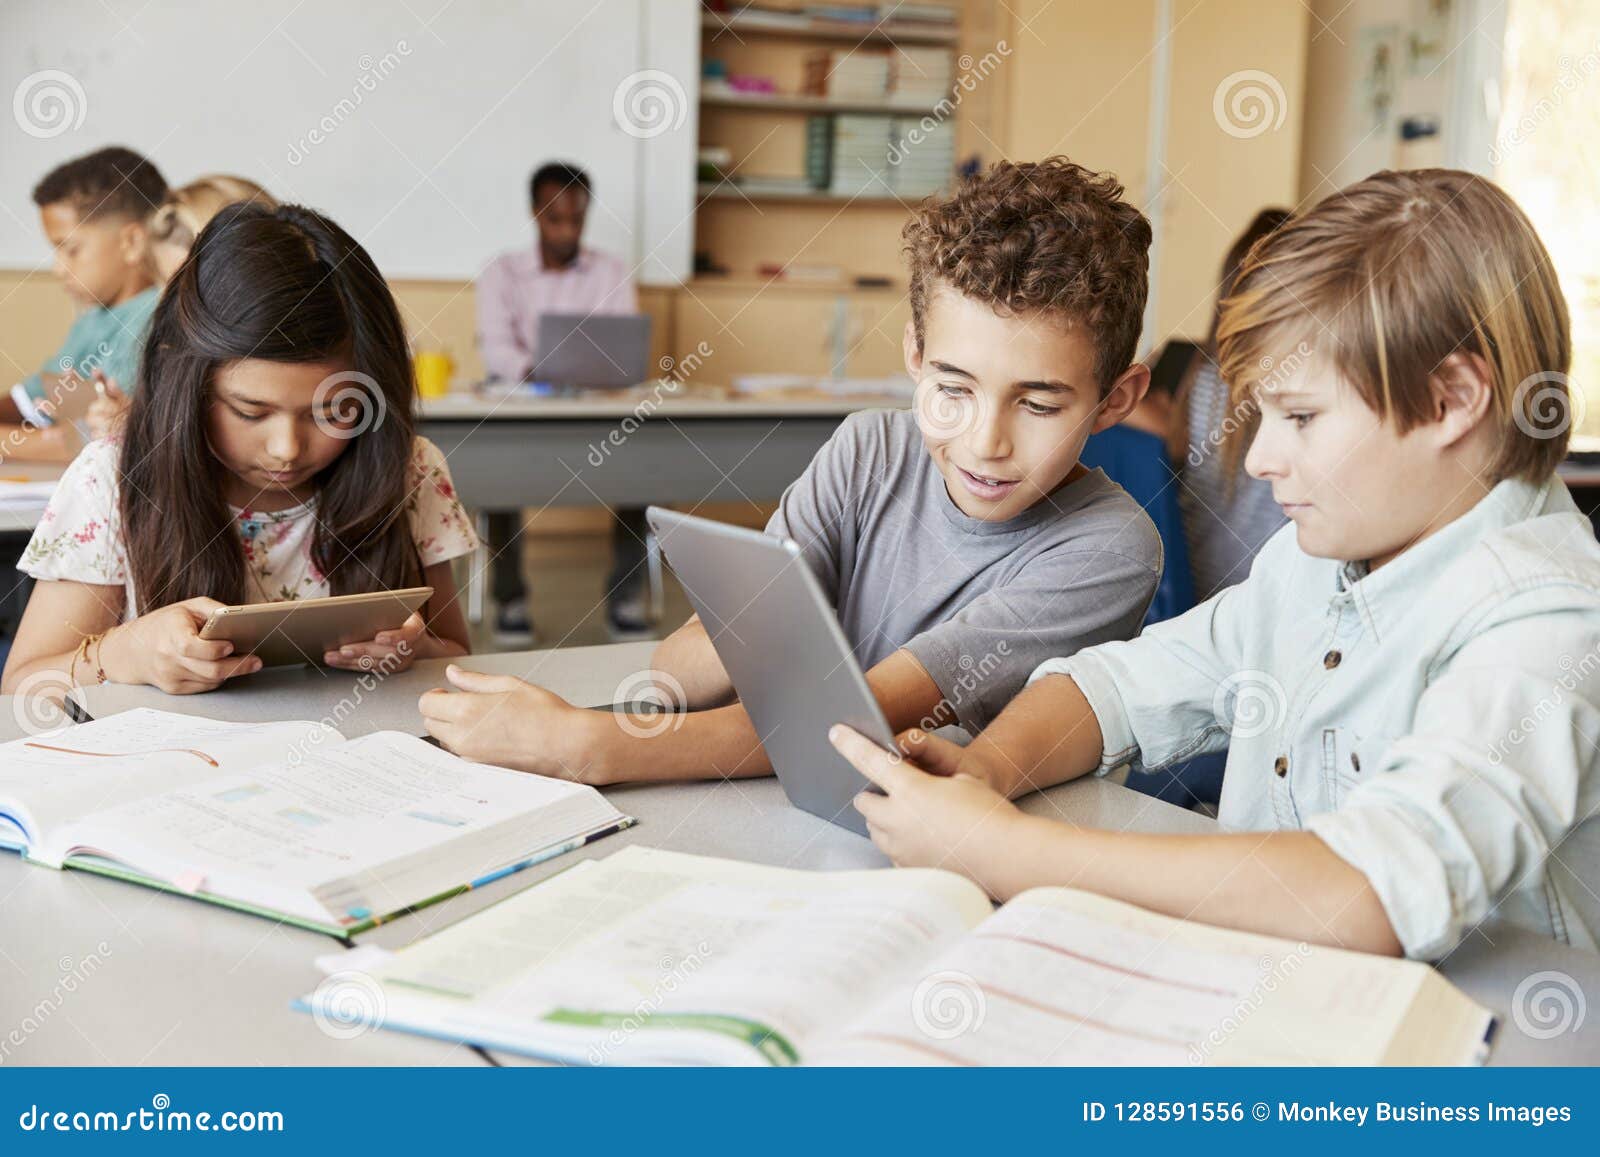 schoolboys working together with tablet computer in class